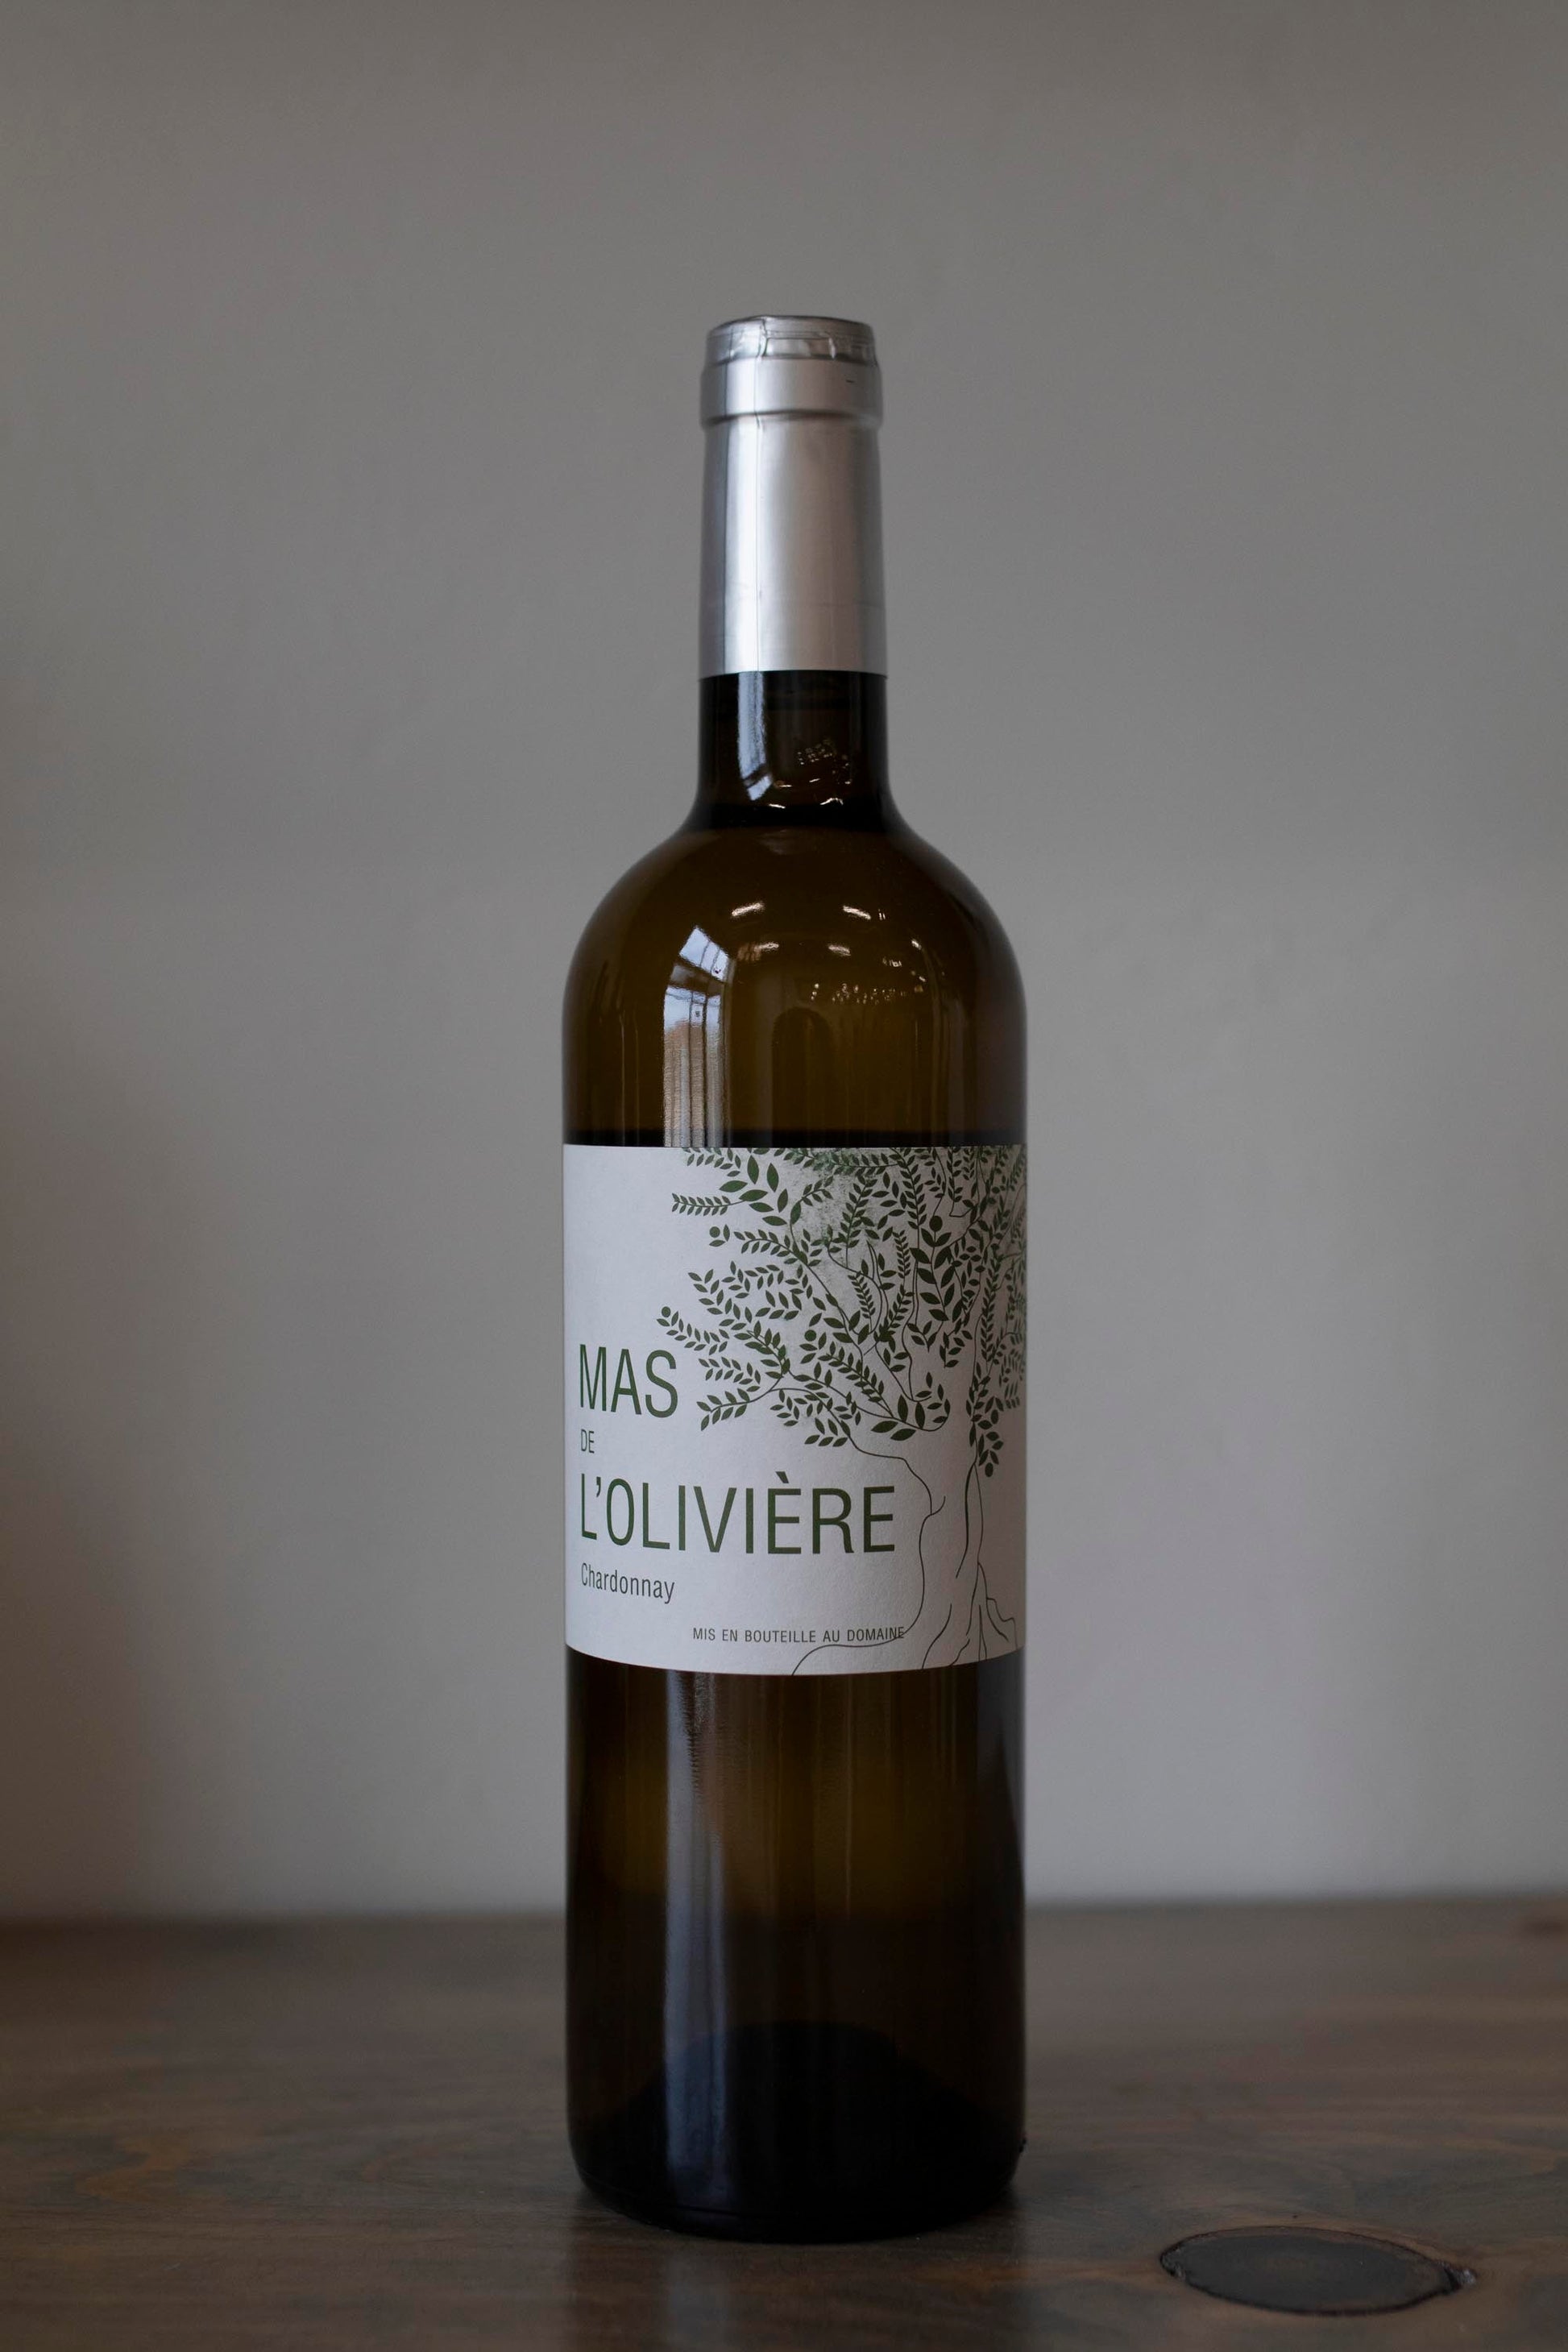 Bottle of Mas de loliviere chard found at Vine & Board in 3809 NW 166th St Suite 1, Edmond, OK 73012